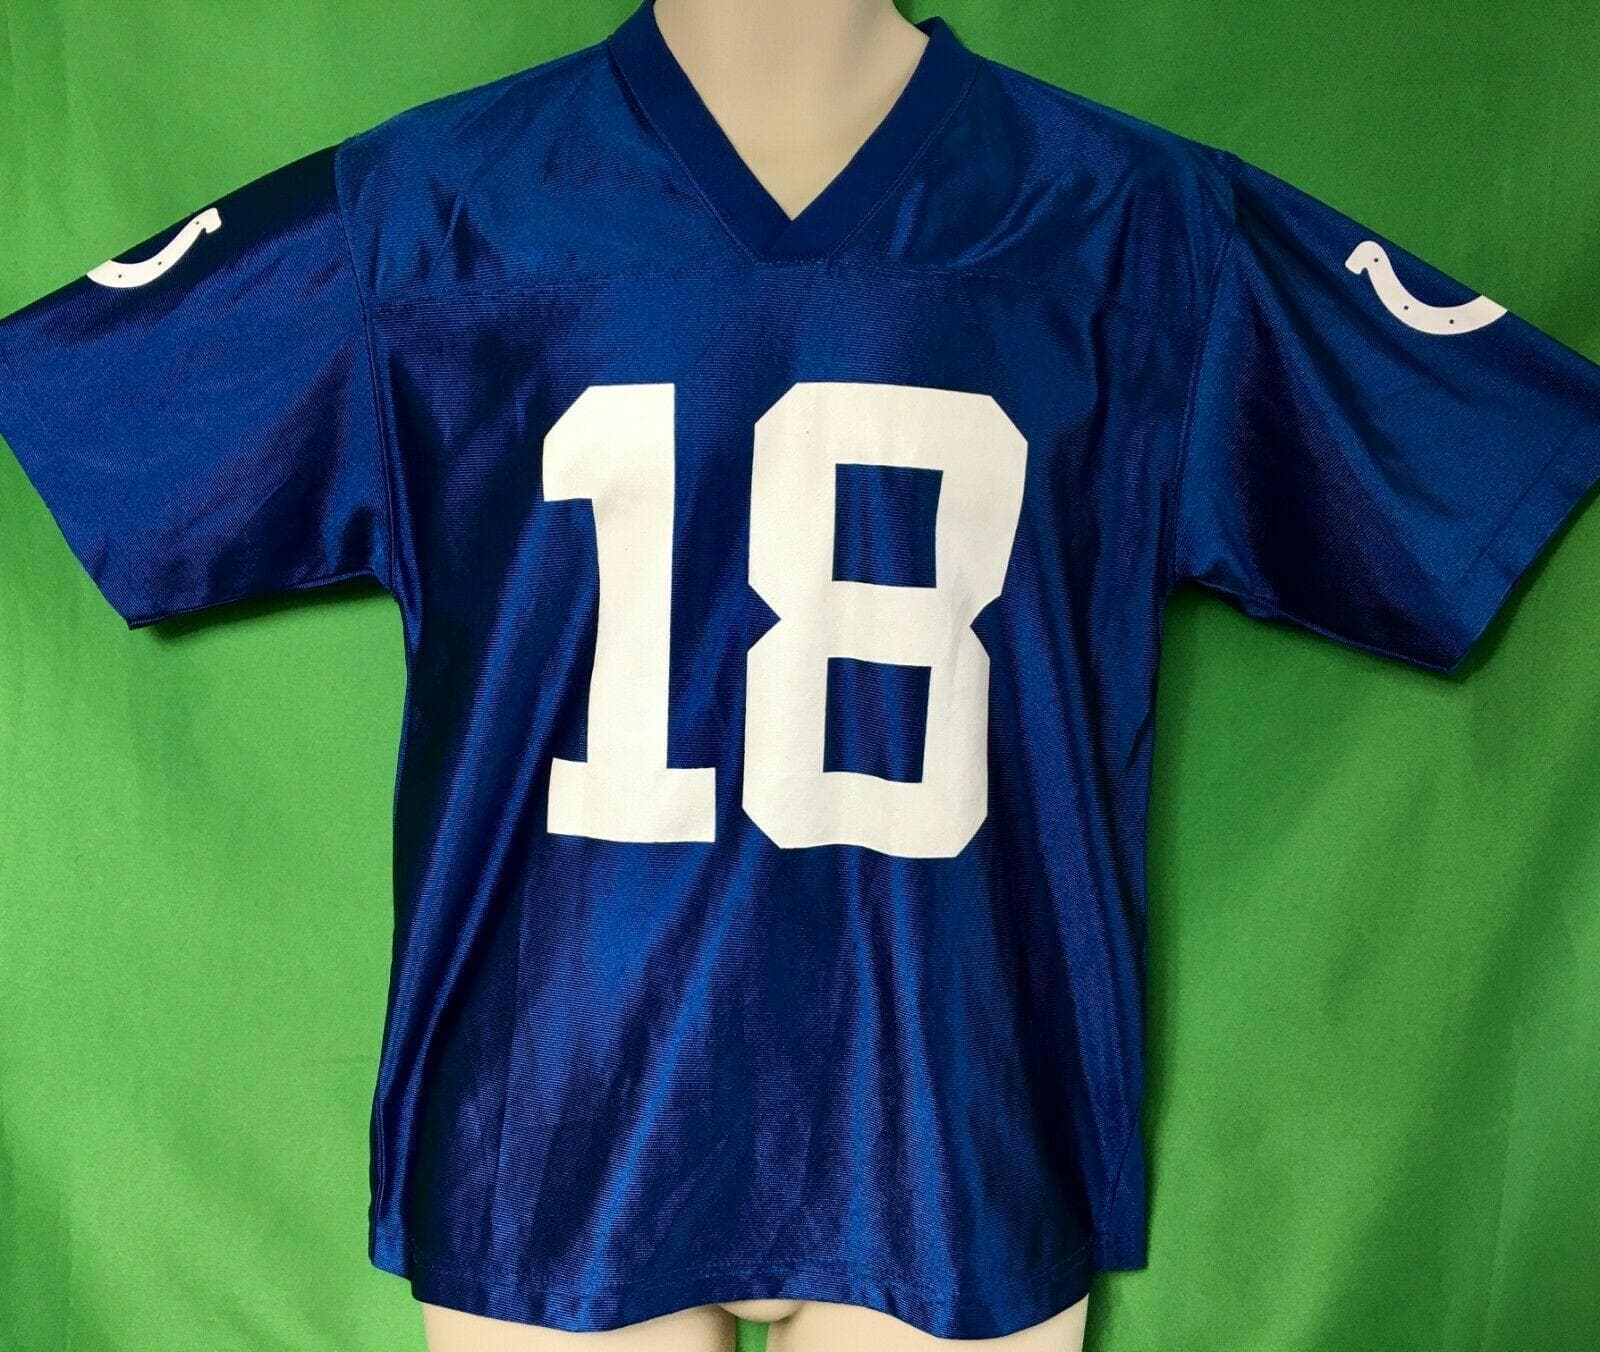 NFL Indianapolis Colts Peyton Manning #18 Jersey Youth Large 14-16